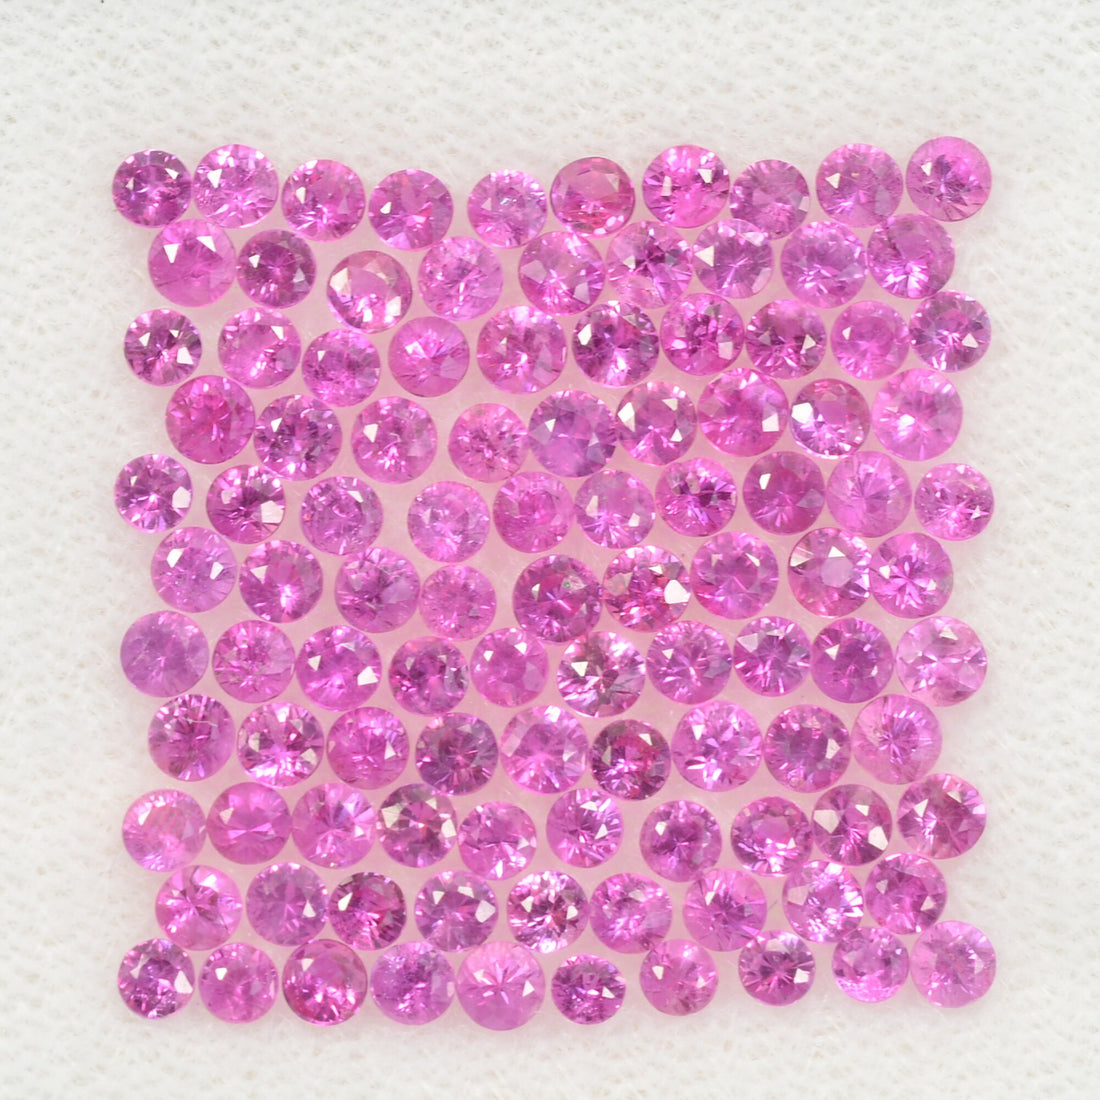 1.8-2.6 mm Natural Pink Sapphire Loose Gemstone Round Diamond Cut Vs Quality A+ Color